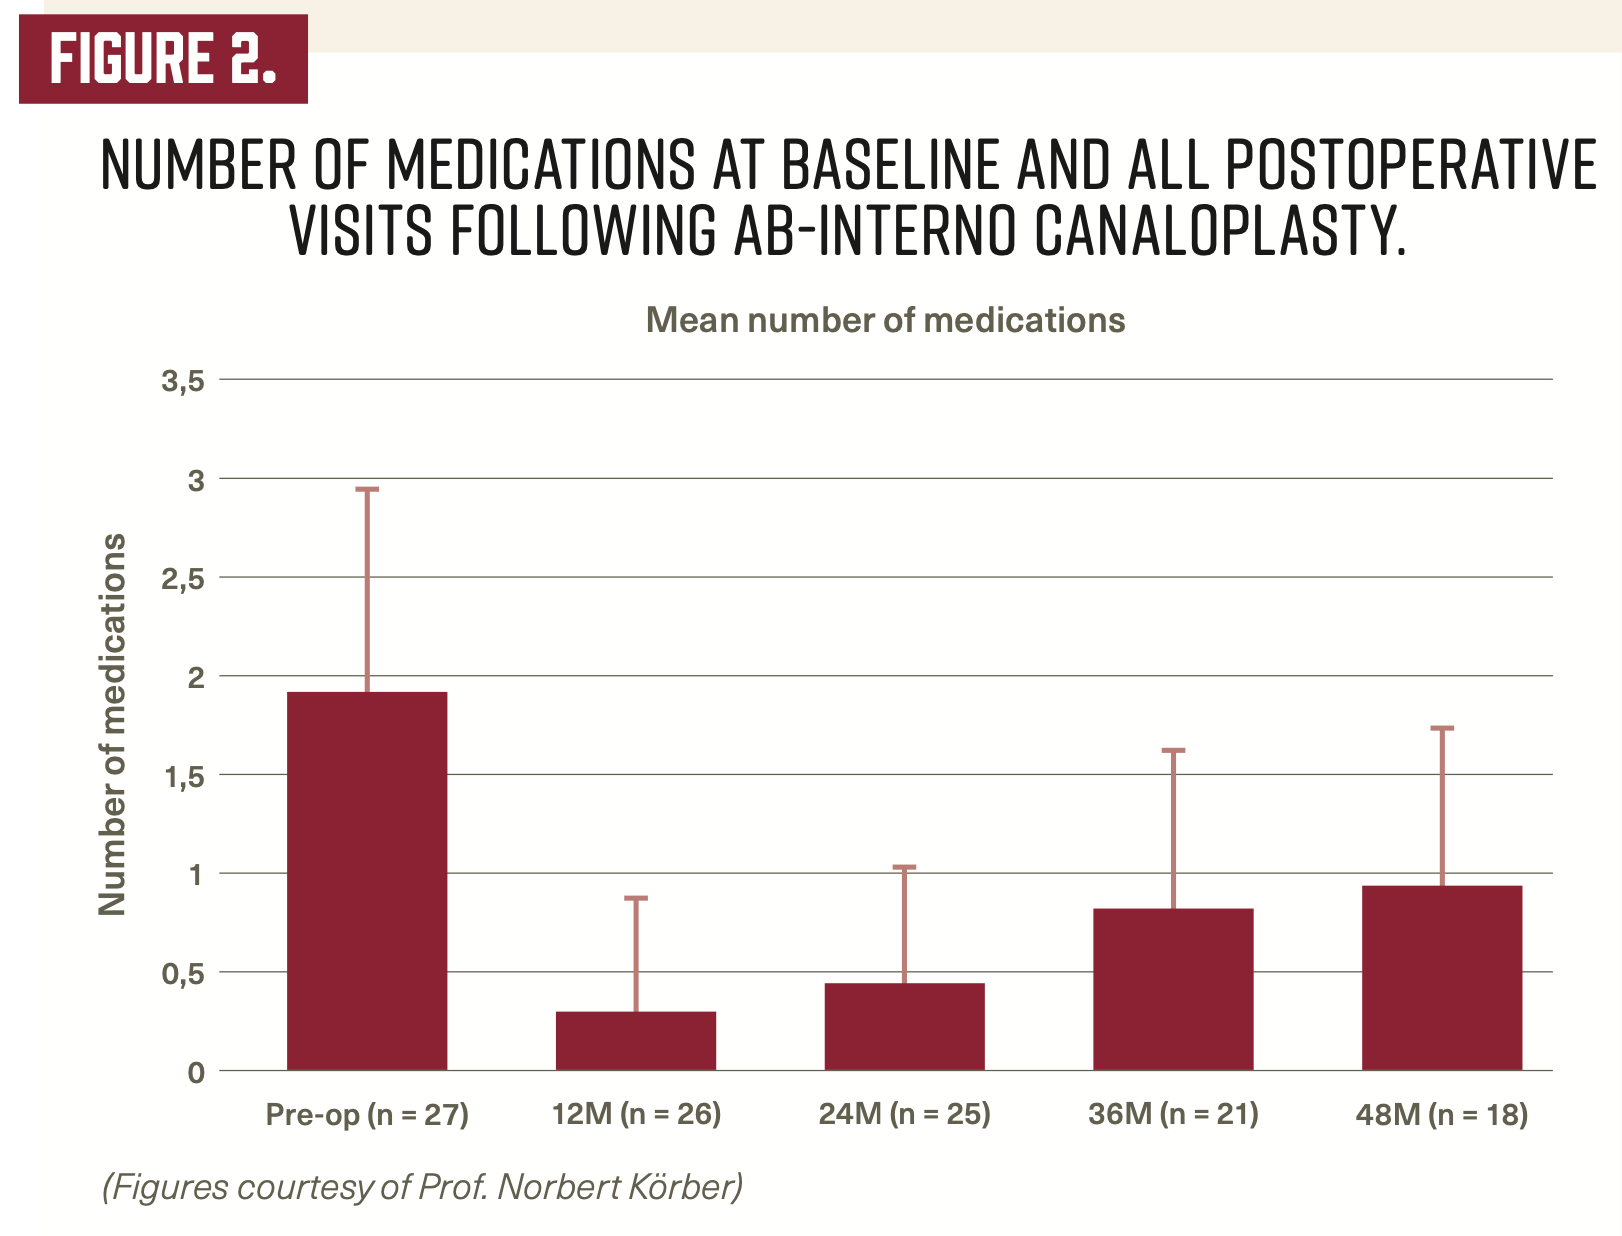 Figure 2: Number of medications at baseline and all postoperative visits following ab-interno canaloplasty. (Images courtesy of Prof. Norbert Körber)